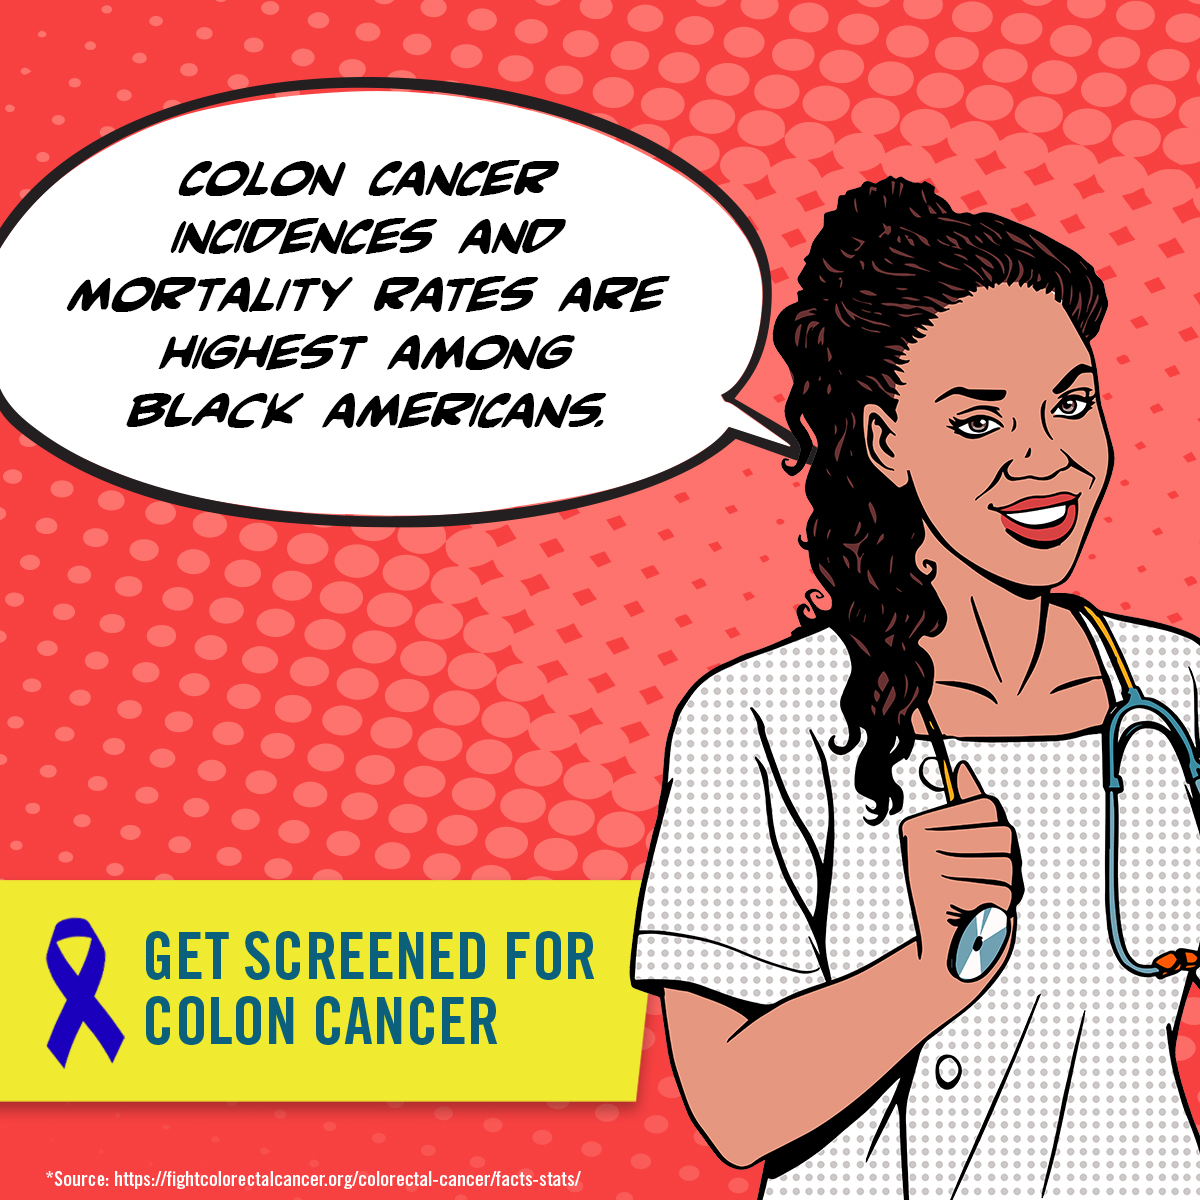 Did you know Black Americans are 20% more likely to get #ColorectalCancer and are 40% more likely to die from it?
Getting regular screenings starting at age 45 is the key to preventing and finding it early.

ow.ly/a6vv50ImEsM

#ColonCancer #ColorectalAwarenessMonth